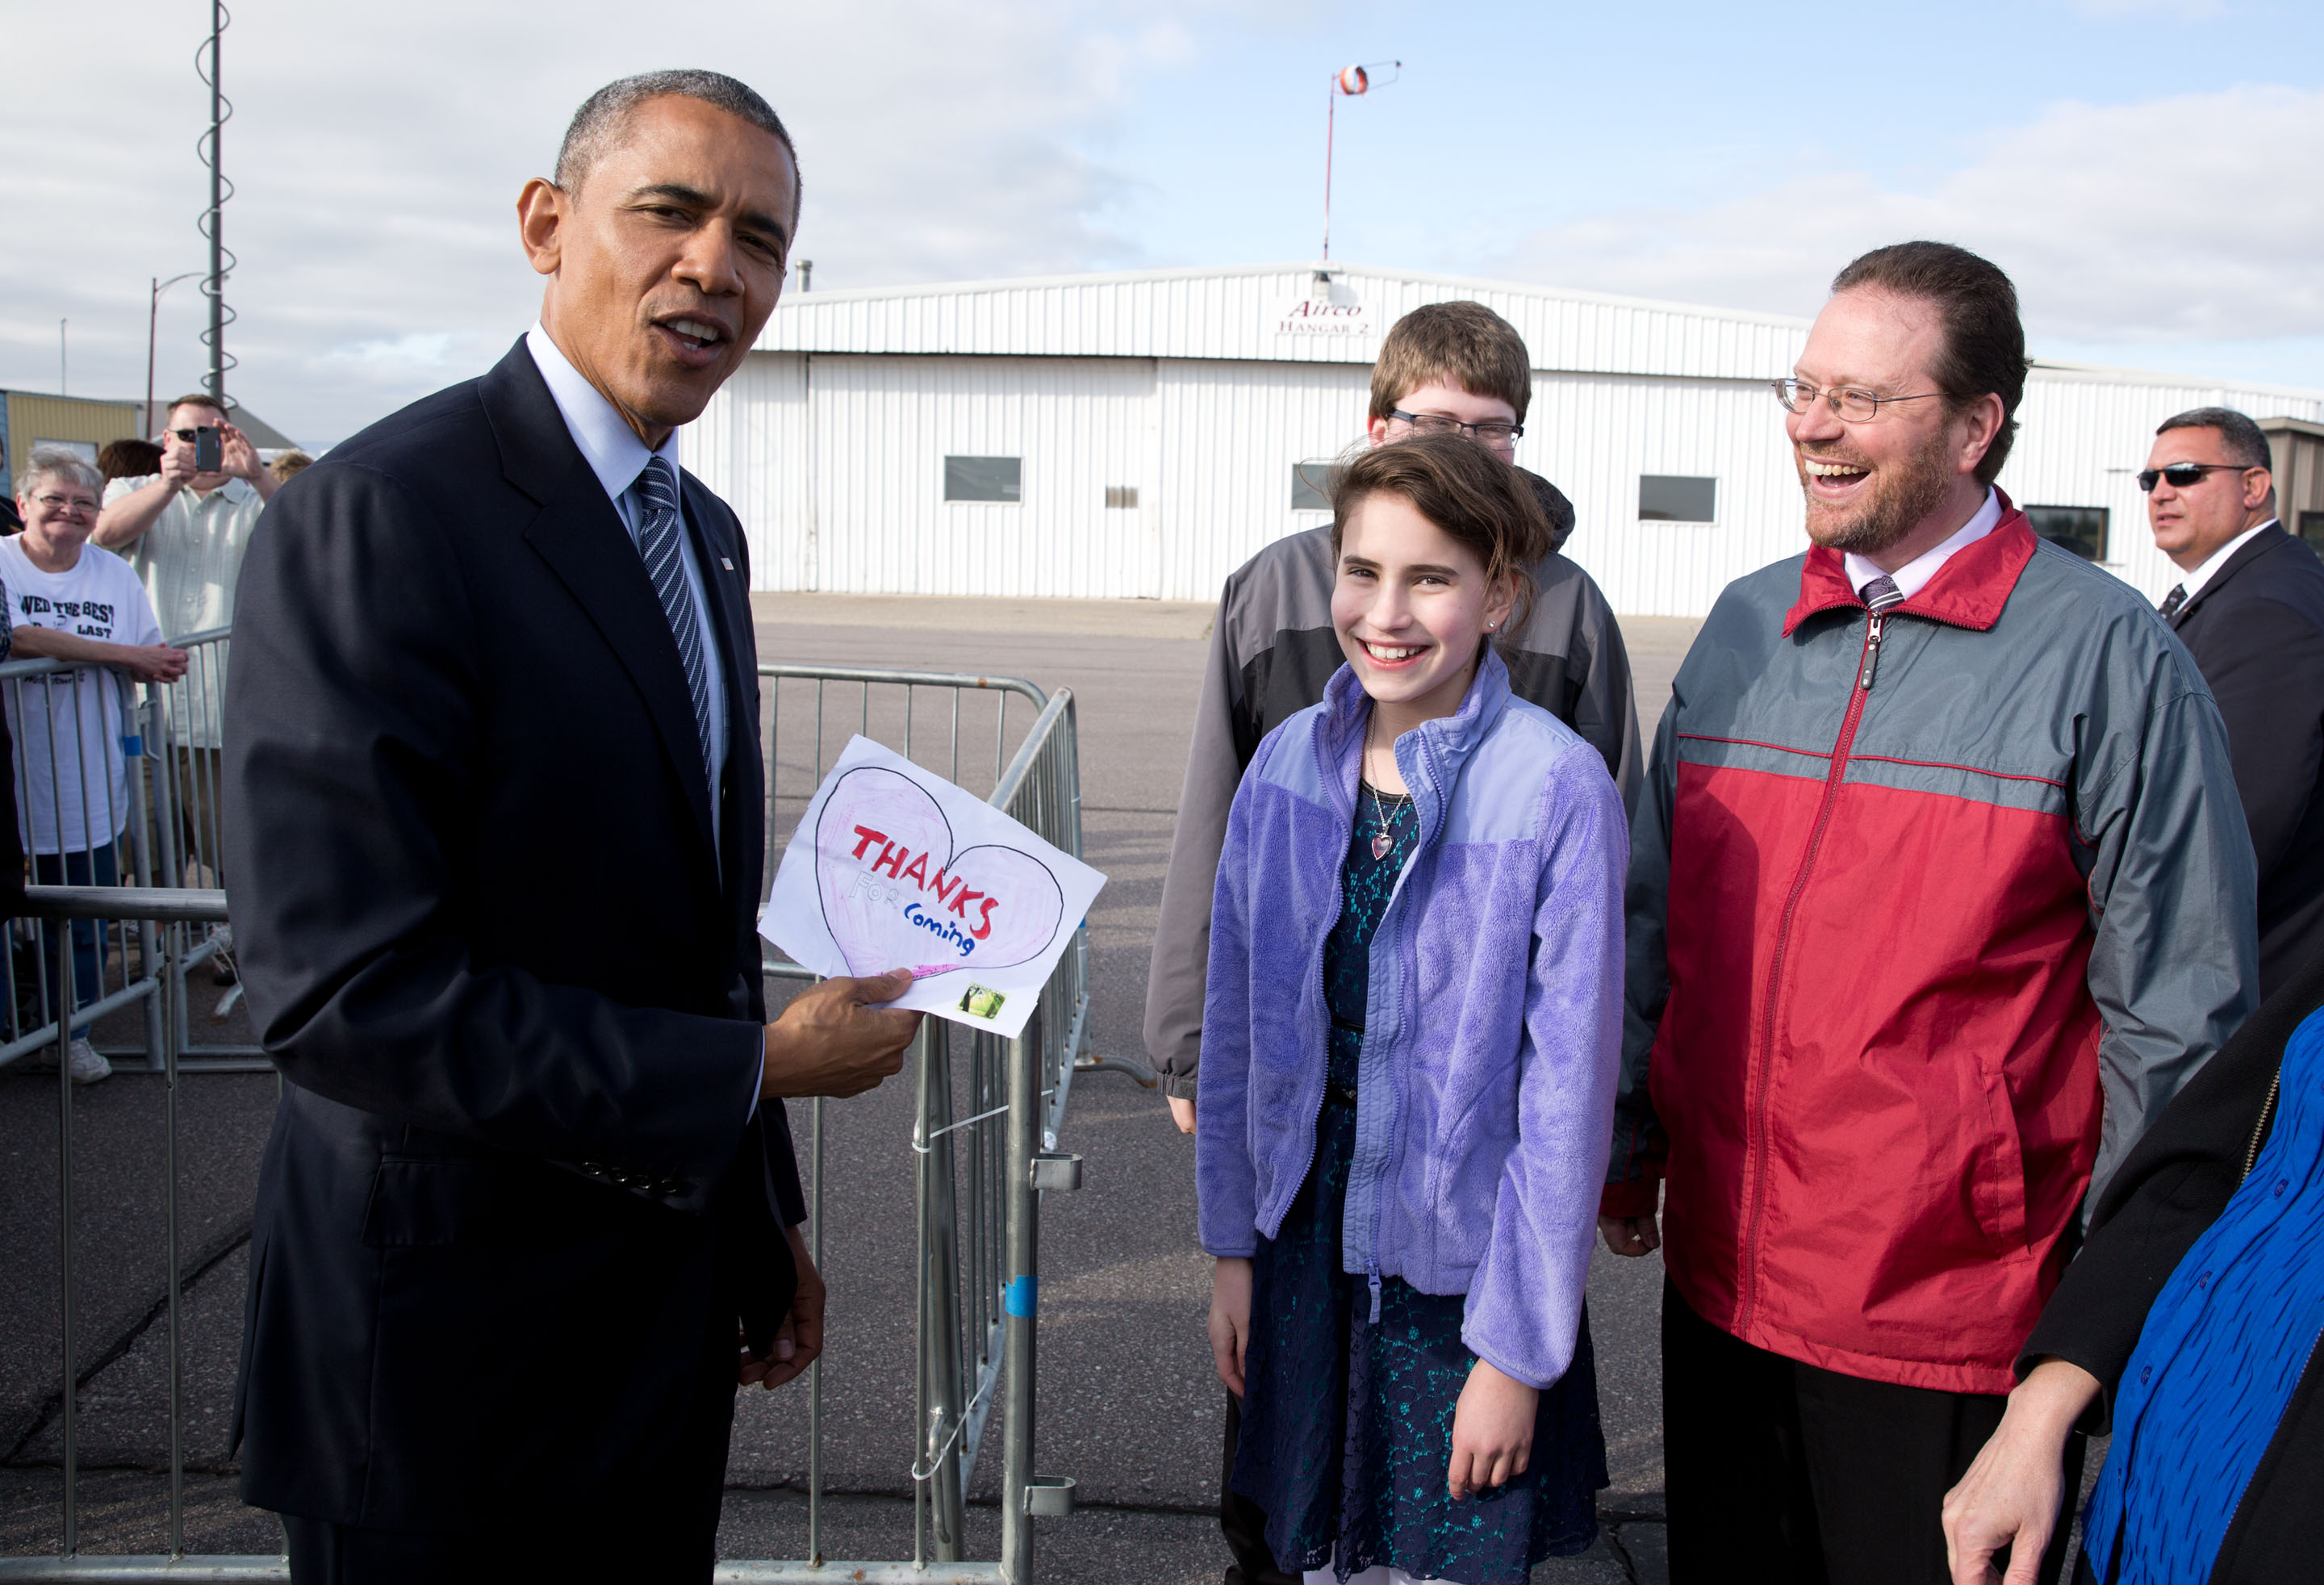 South Dakota, 2015. Showing off the note given to him in Watertown by Rebecca Kelley, who had written him a letter asking him to visit the state. (Official White House Photo by Pete Souza)